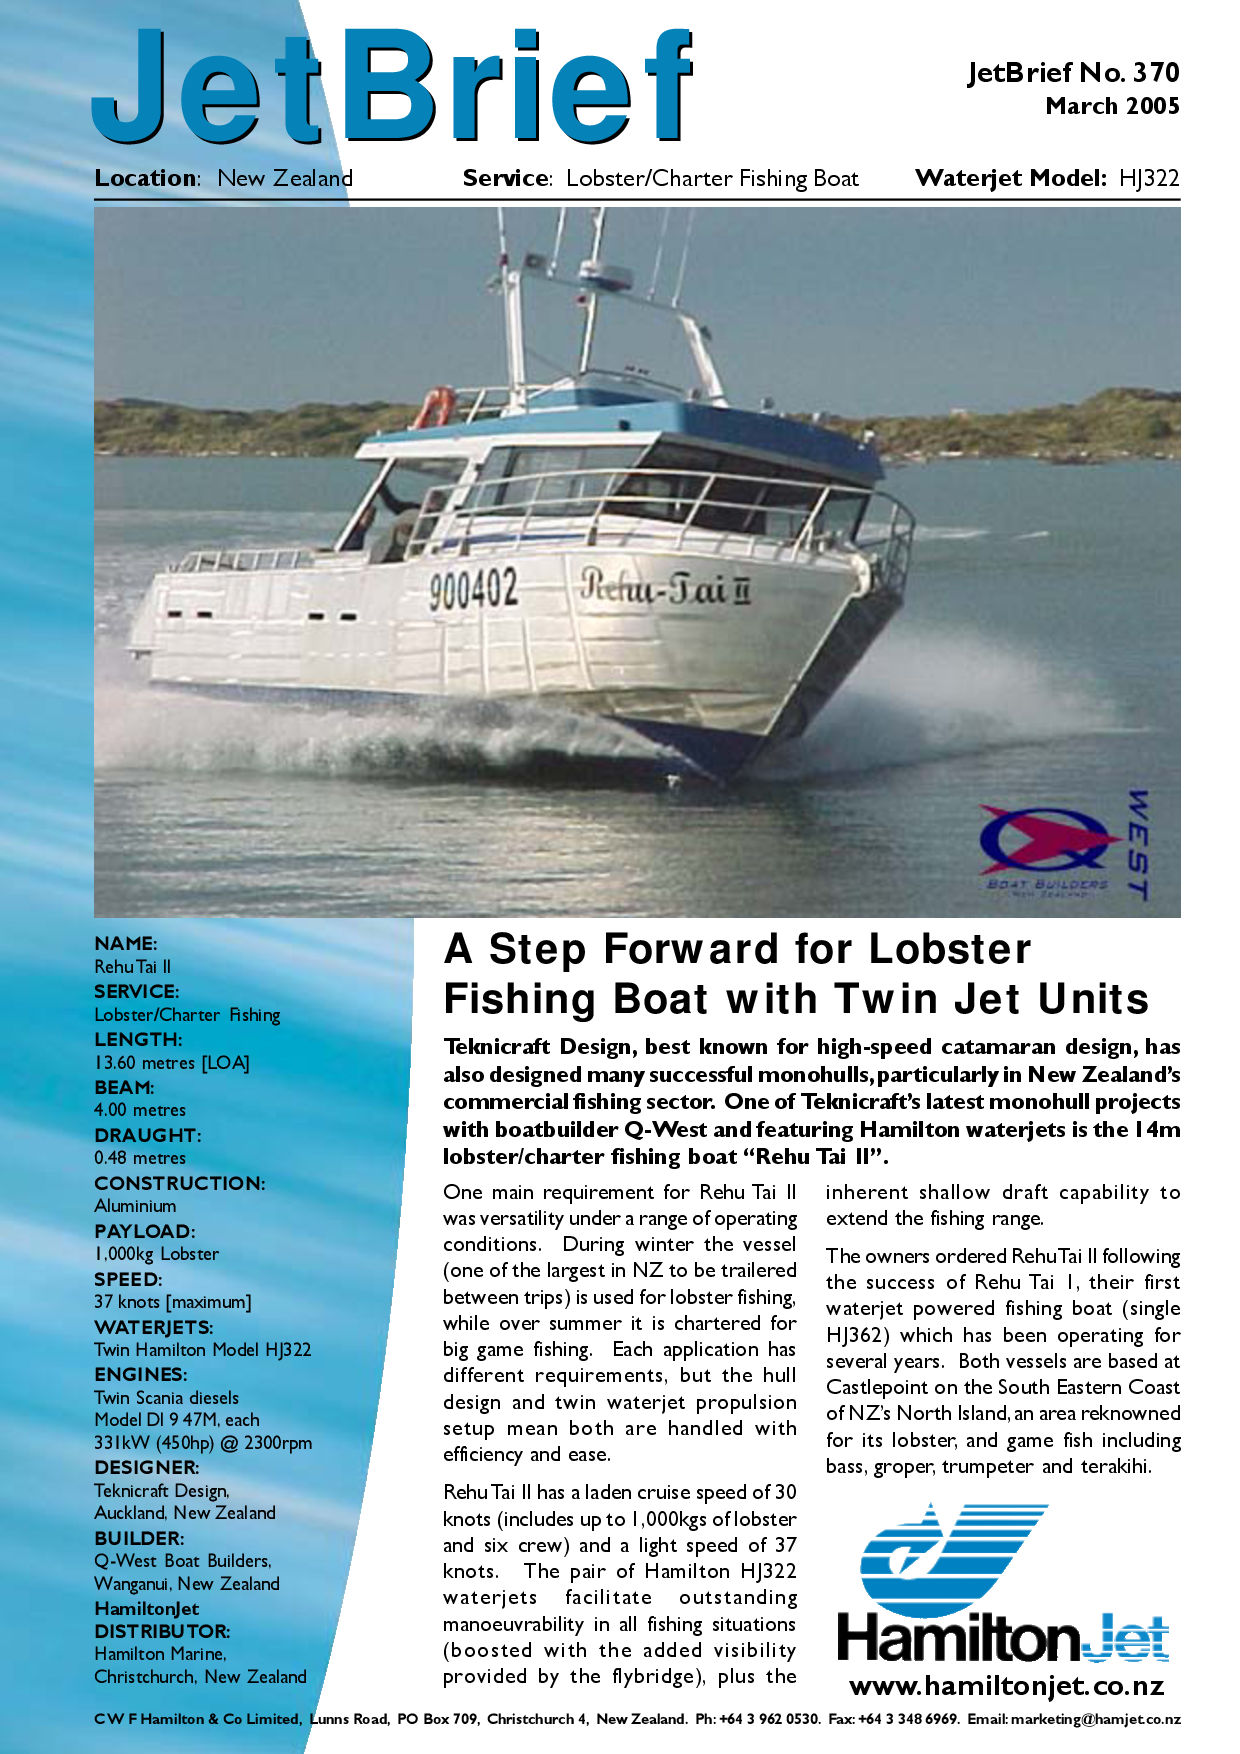 A Step Forward for Lobster Fishing Boat with Twin Jet Units